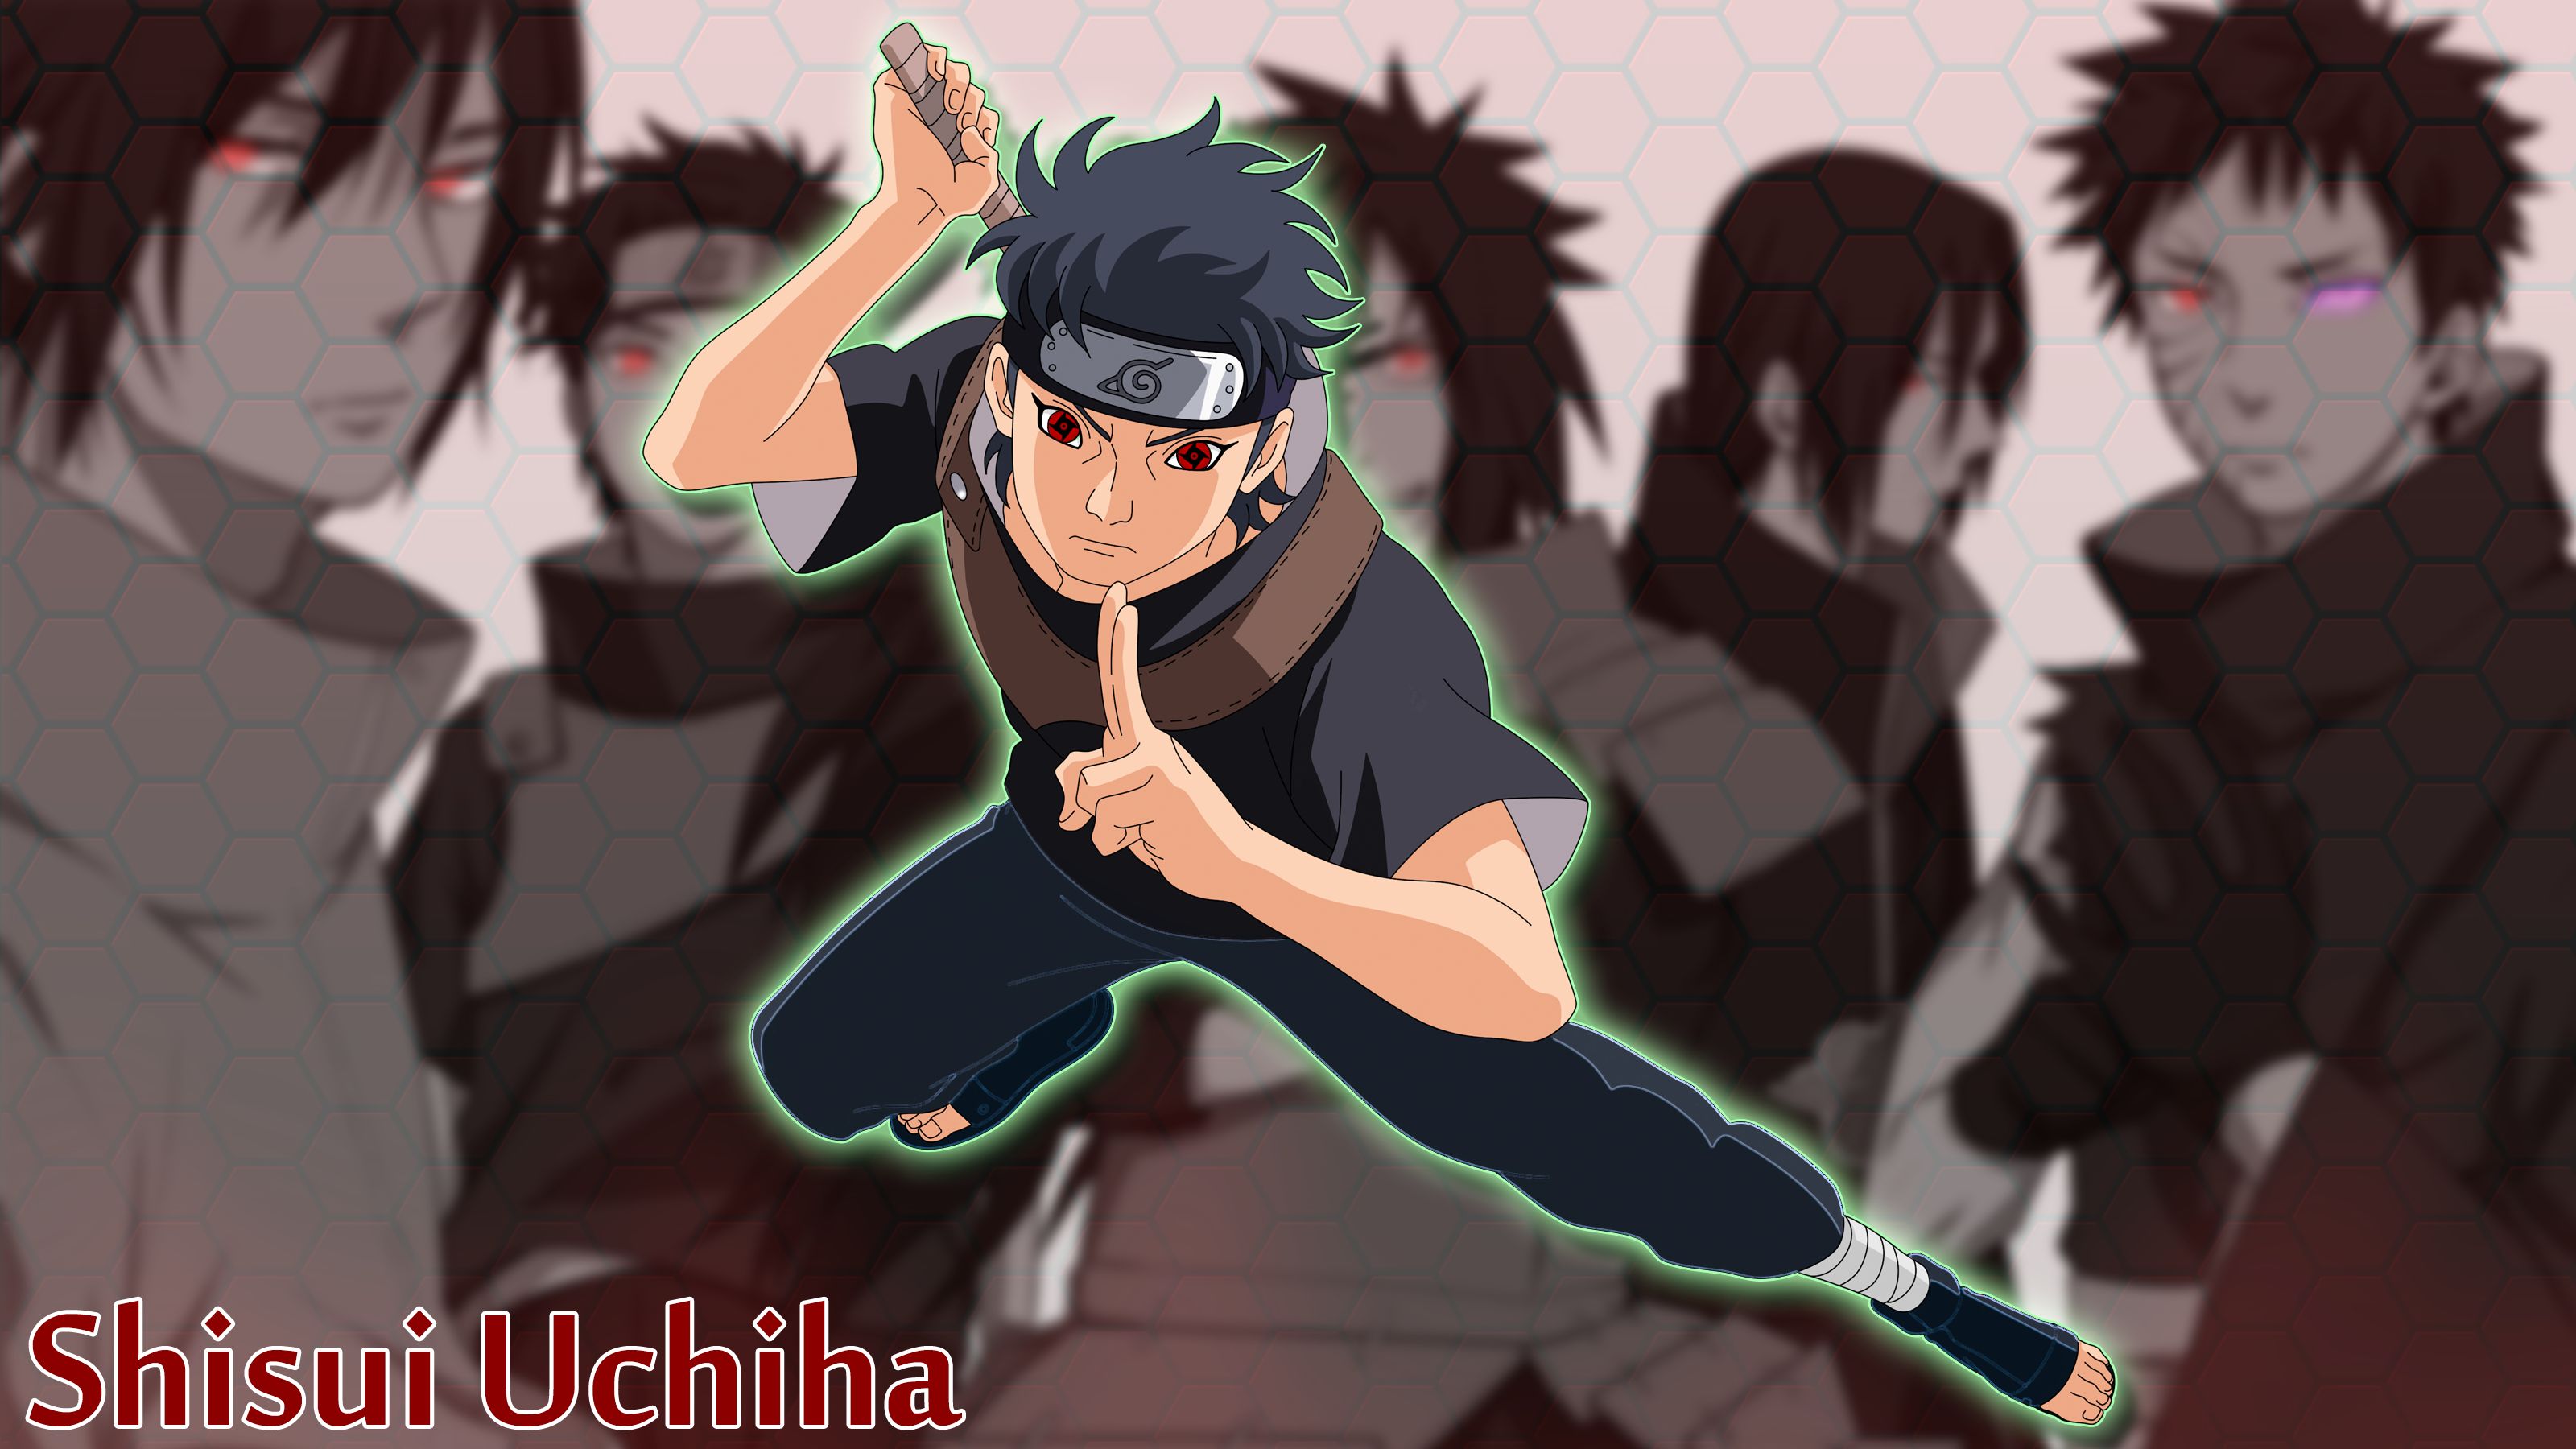 Shisui Uchiha wallpapers for desktop, download free Shisui Uchiha pictures  and backgrounds for PC 